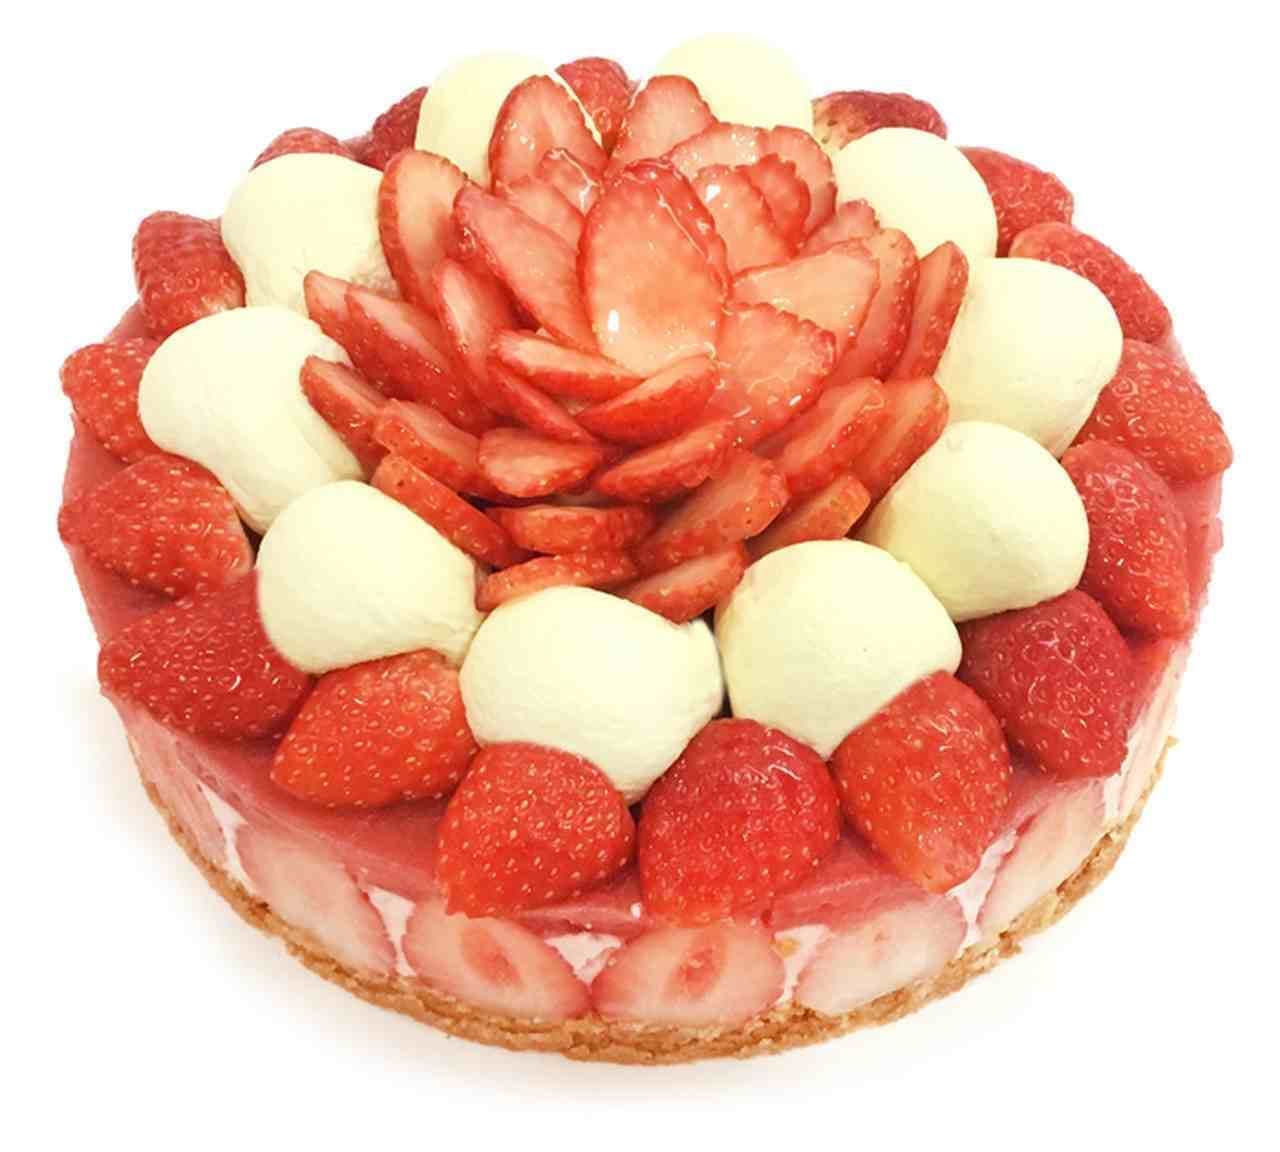 Cafe COMSA "Strawberry Day" limited edition cake